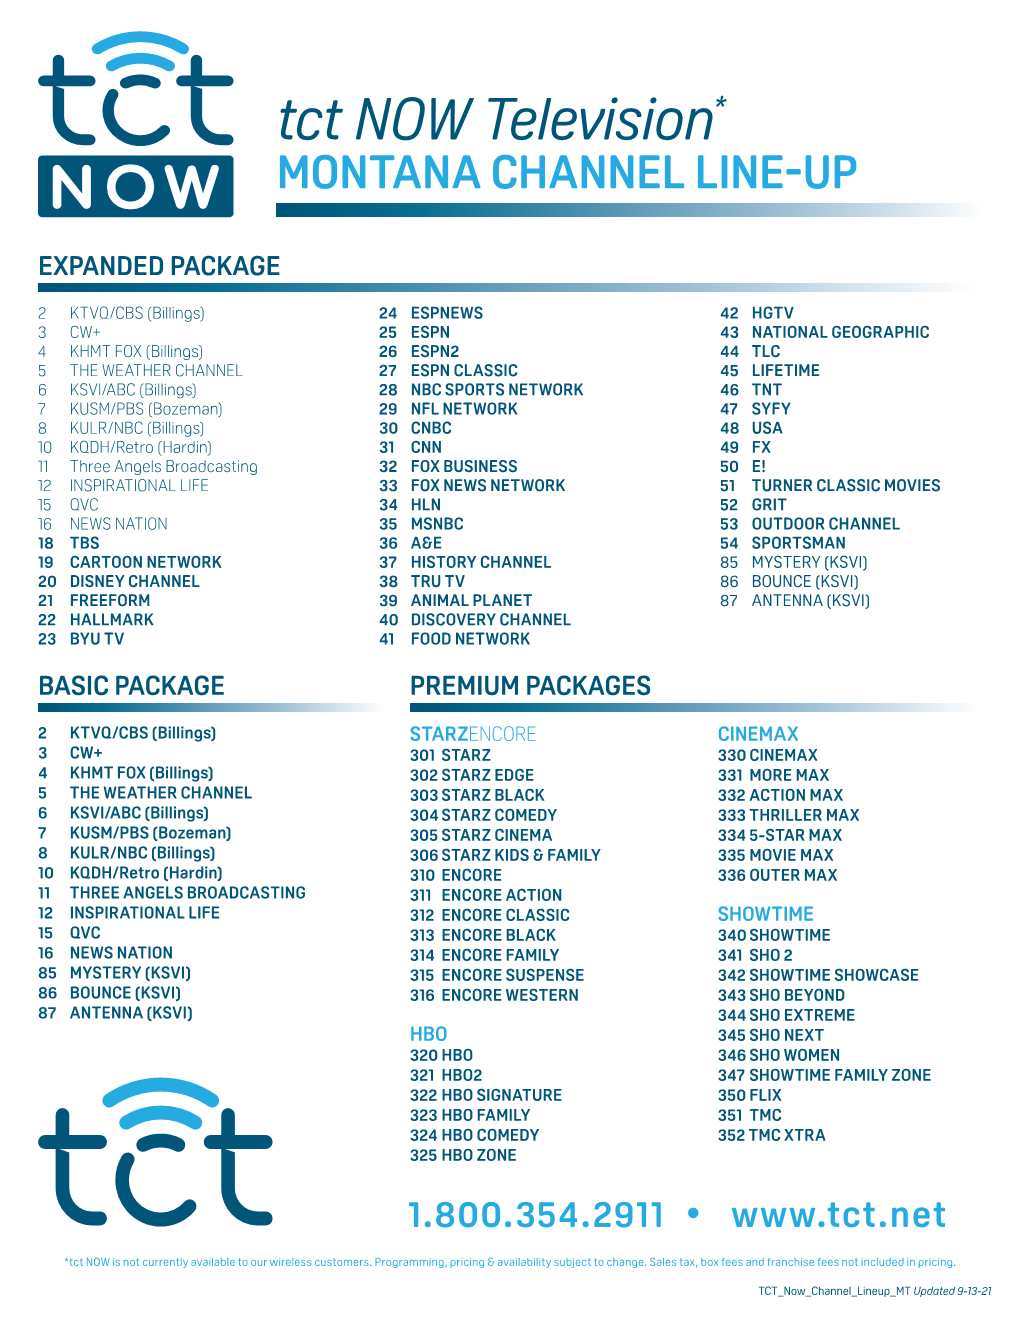 Montana Tct NOW Channel Lineup